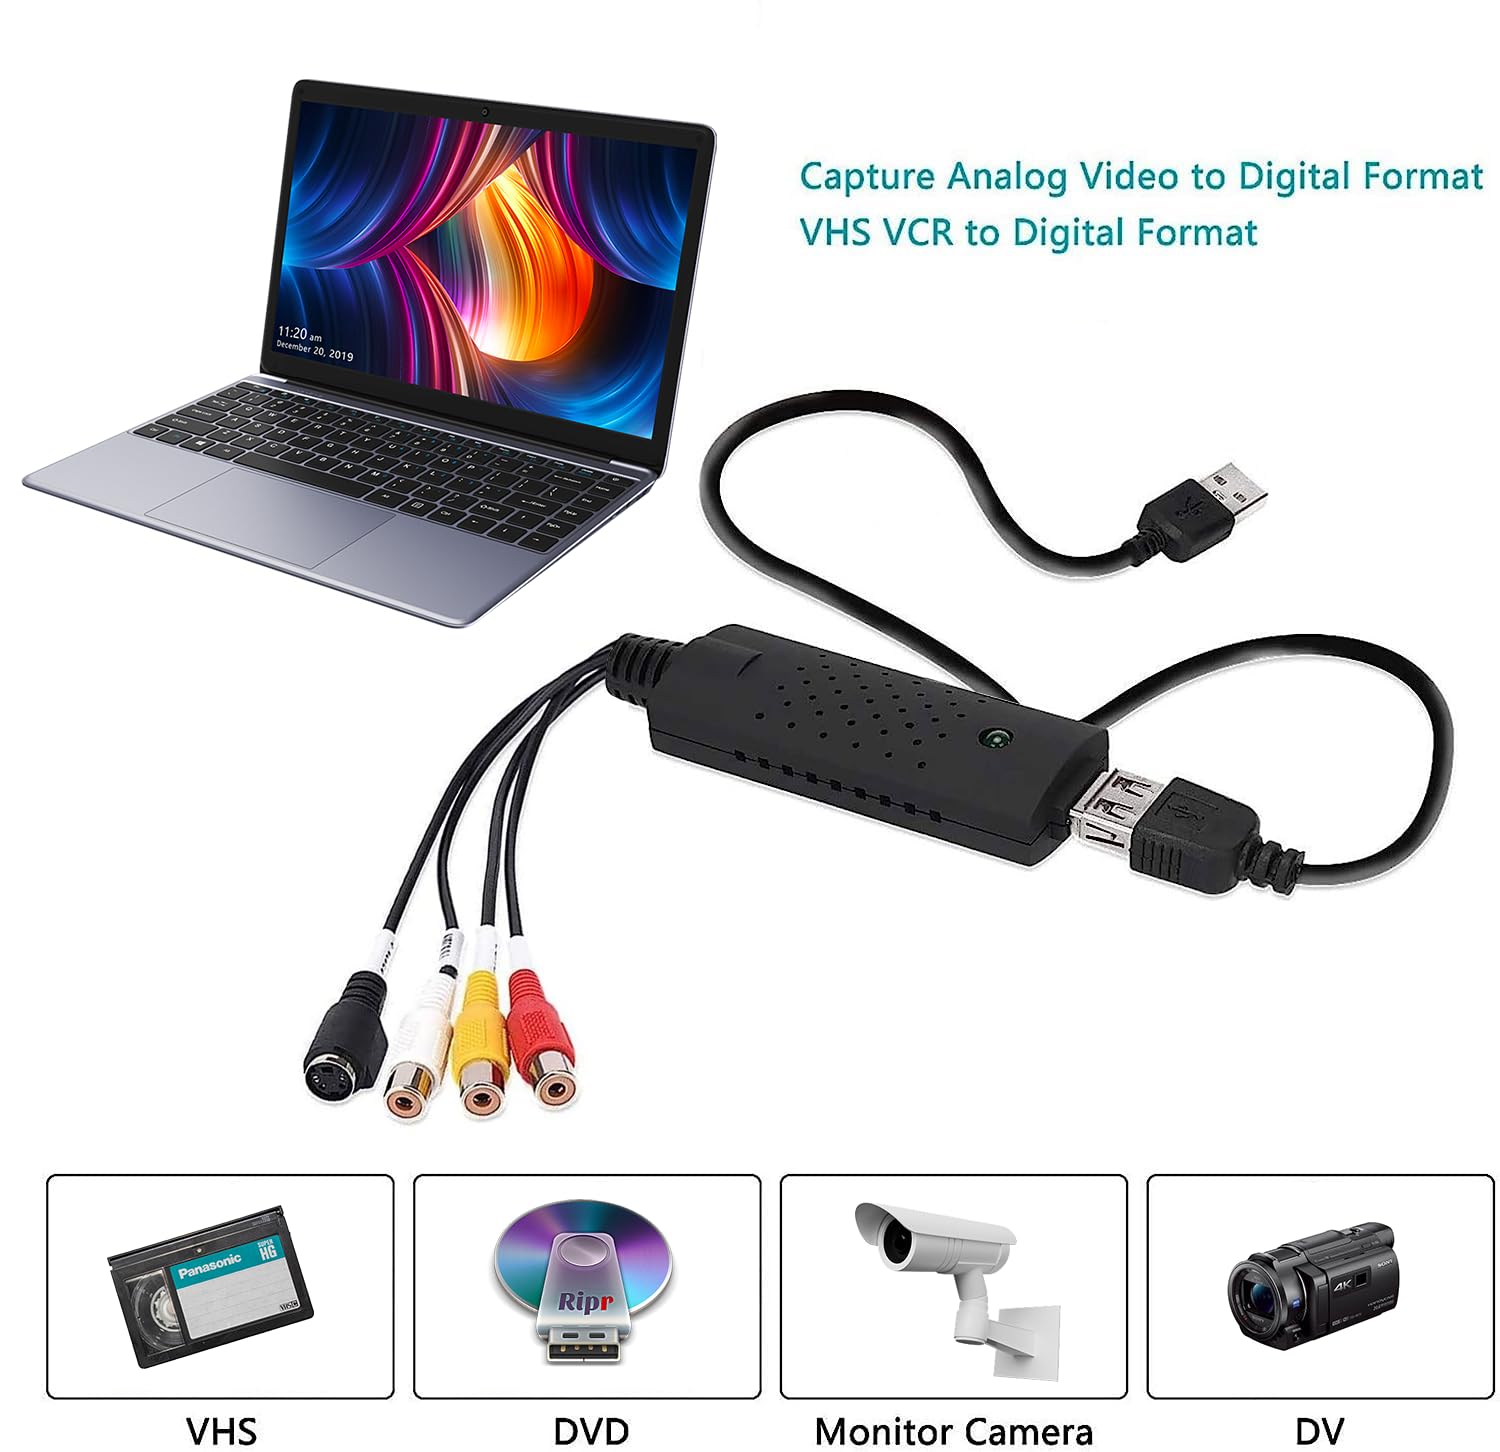 YUANLY VHS to Digital Converter,Video Capture Card USB 2.0 Audio Video Capture Card Device Old VHS Mini DV Hi8 DVD VCR to Digital Converter for Mac,PC Support Windows 2000/10/8/7/Vista/XP/Android